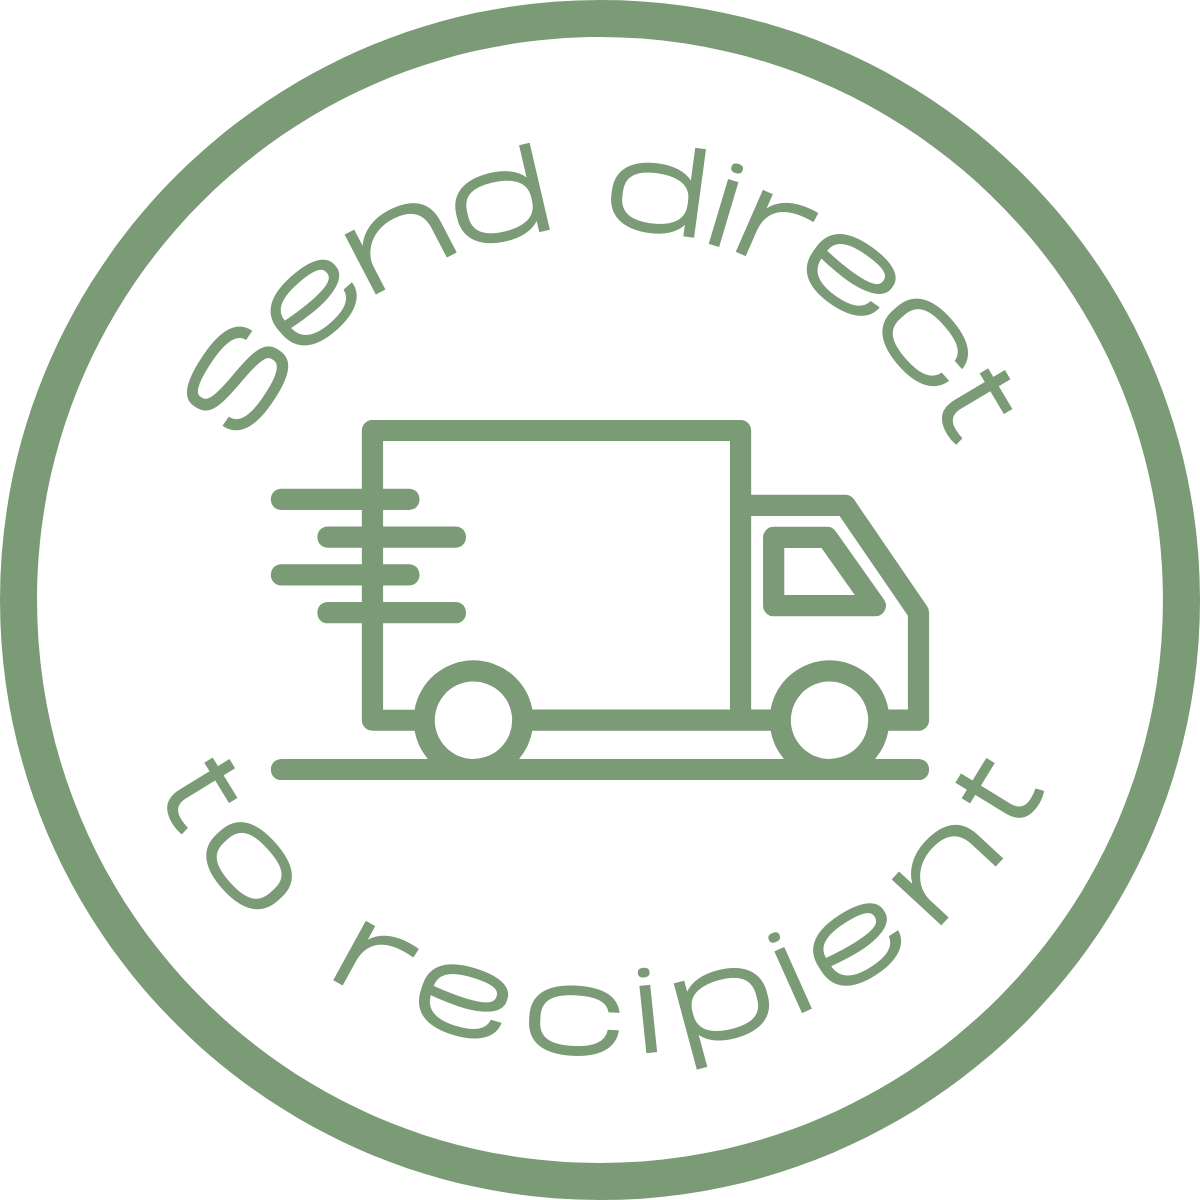 Send gift direct to recipient